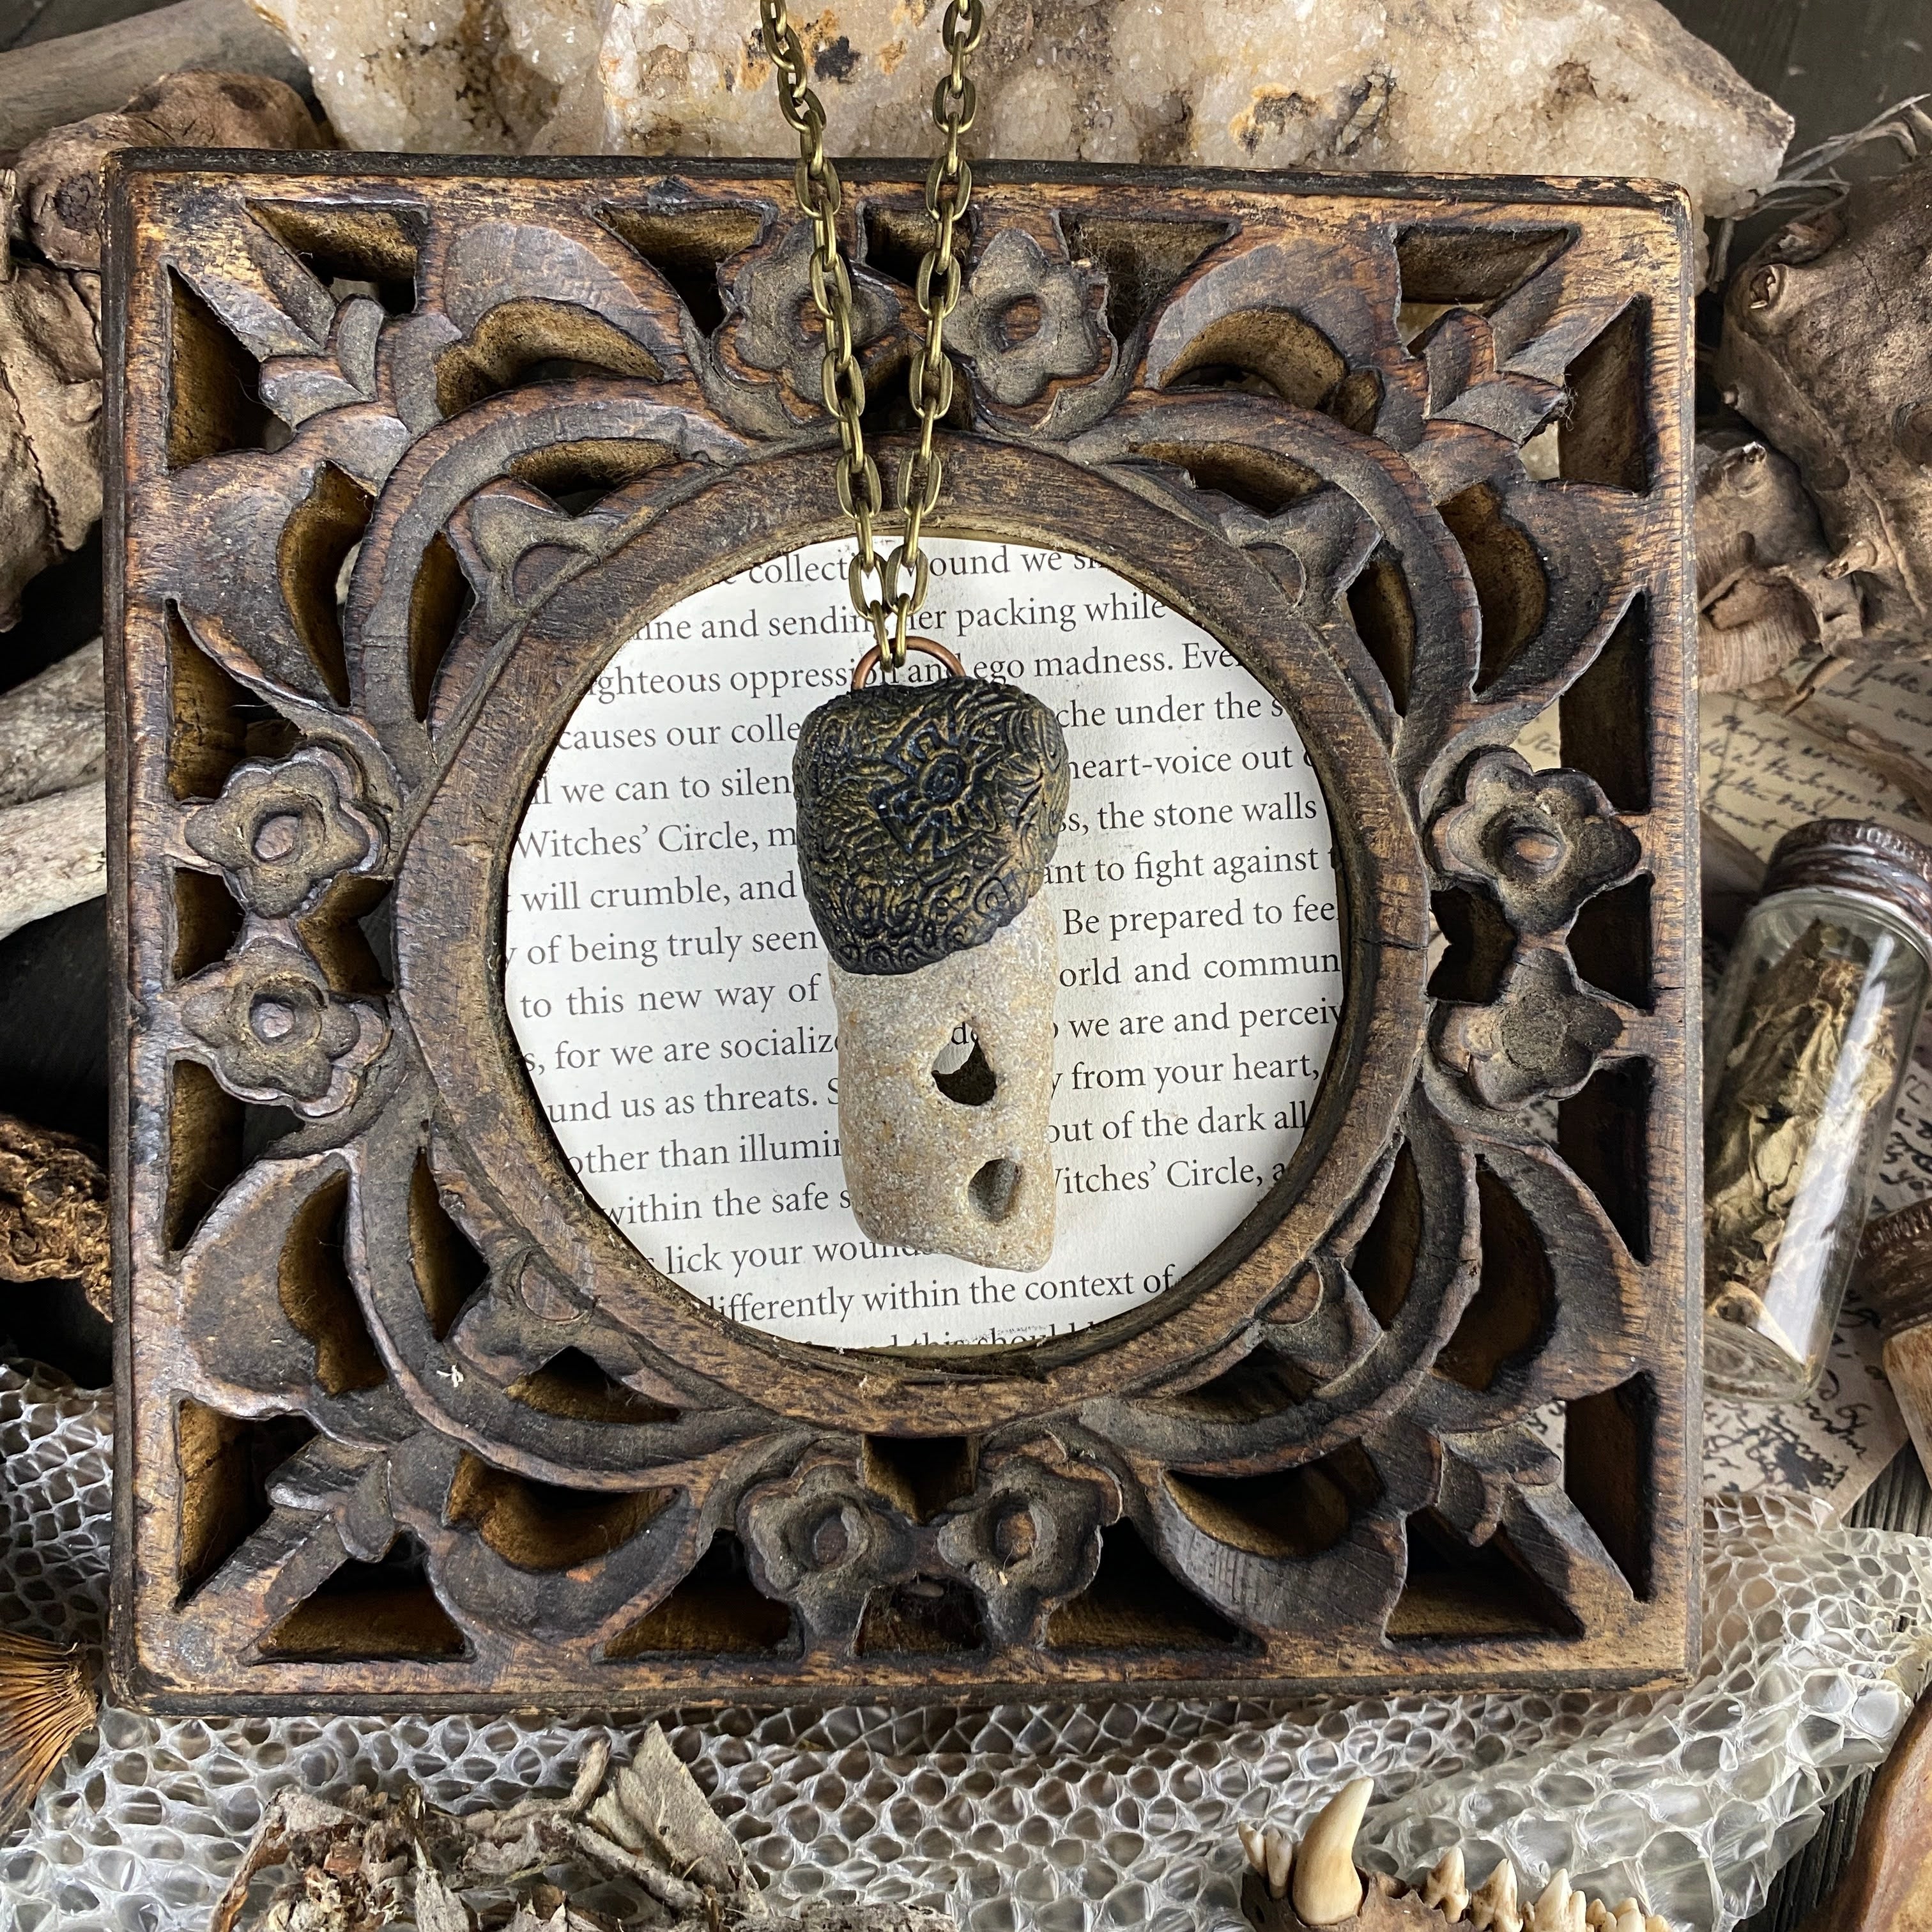 Hag Stone Talisman Necklace with a Tribal/Nature Inspired Clay Pattern